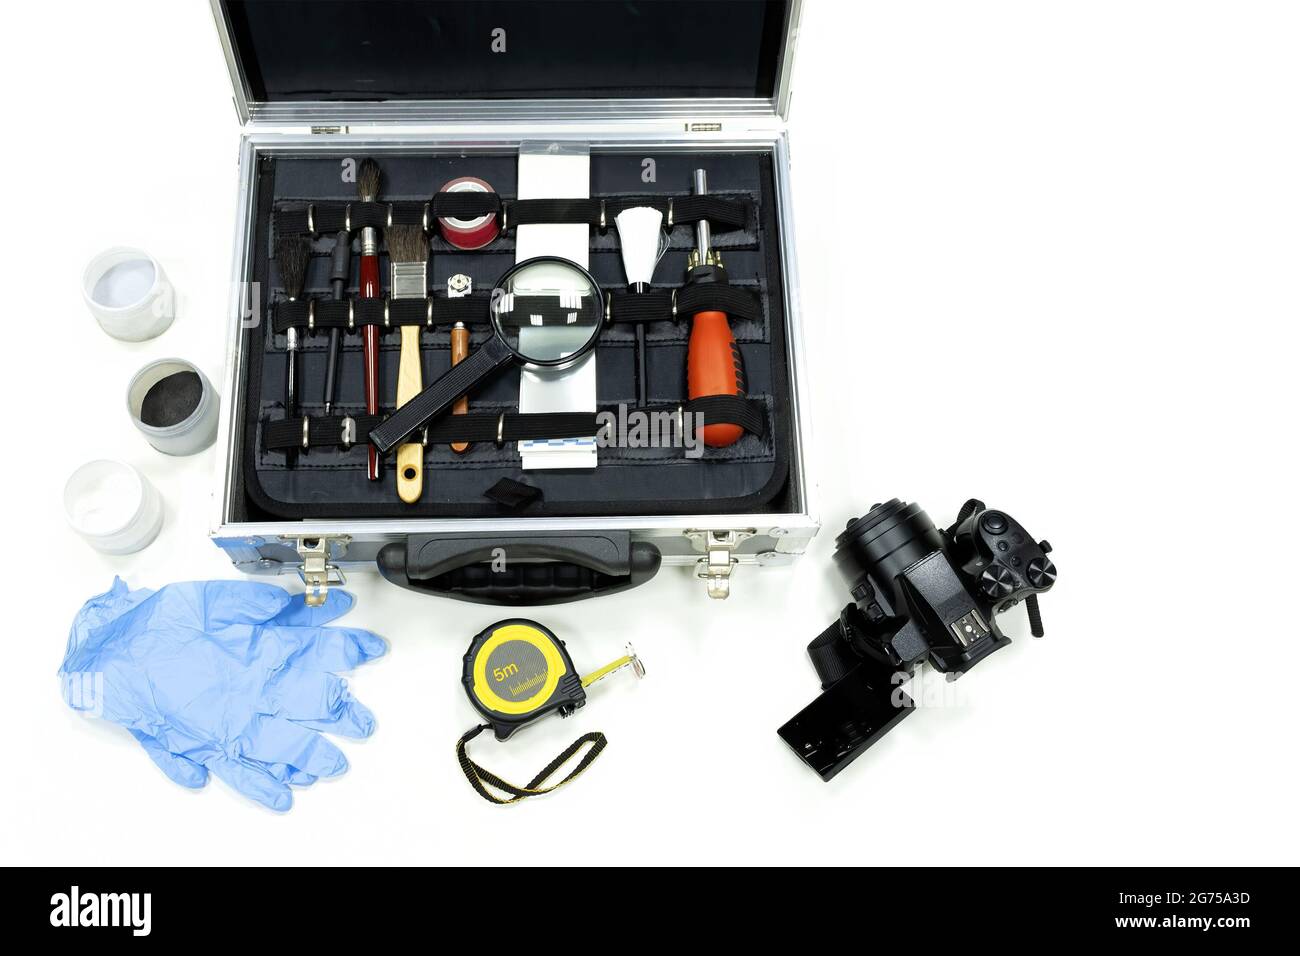 Top view of a scientific police briefcase, CSI with everything needed for a criminal investigation Stock Photo